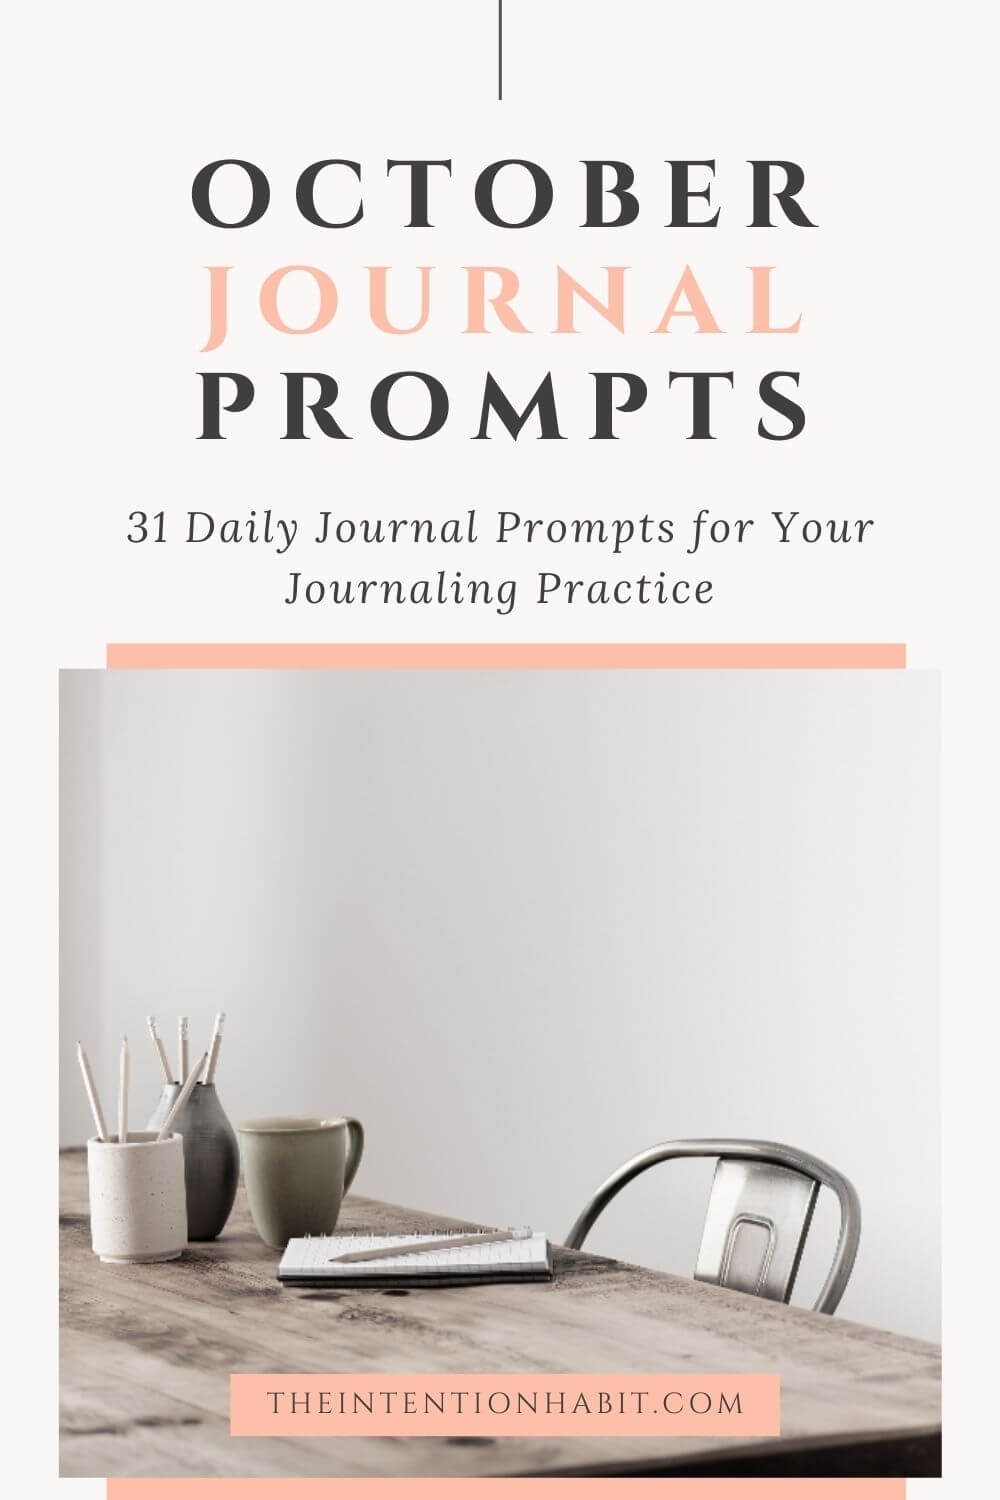 october journal prompts for daily journaling